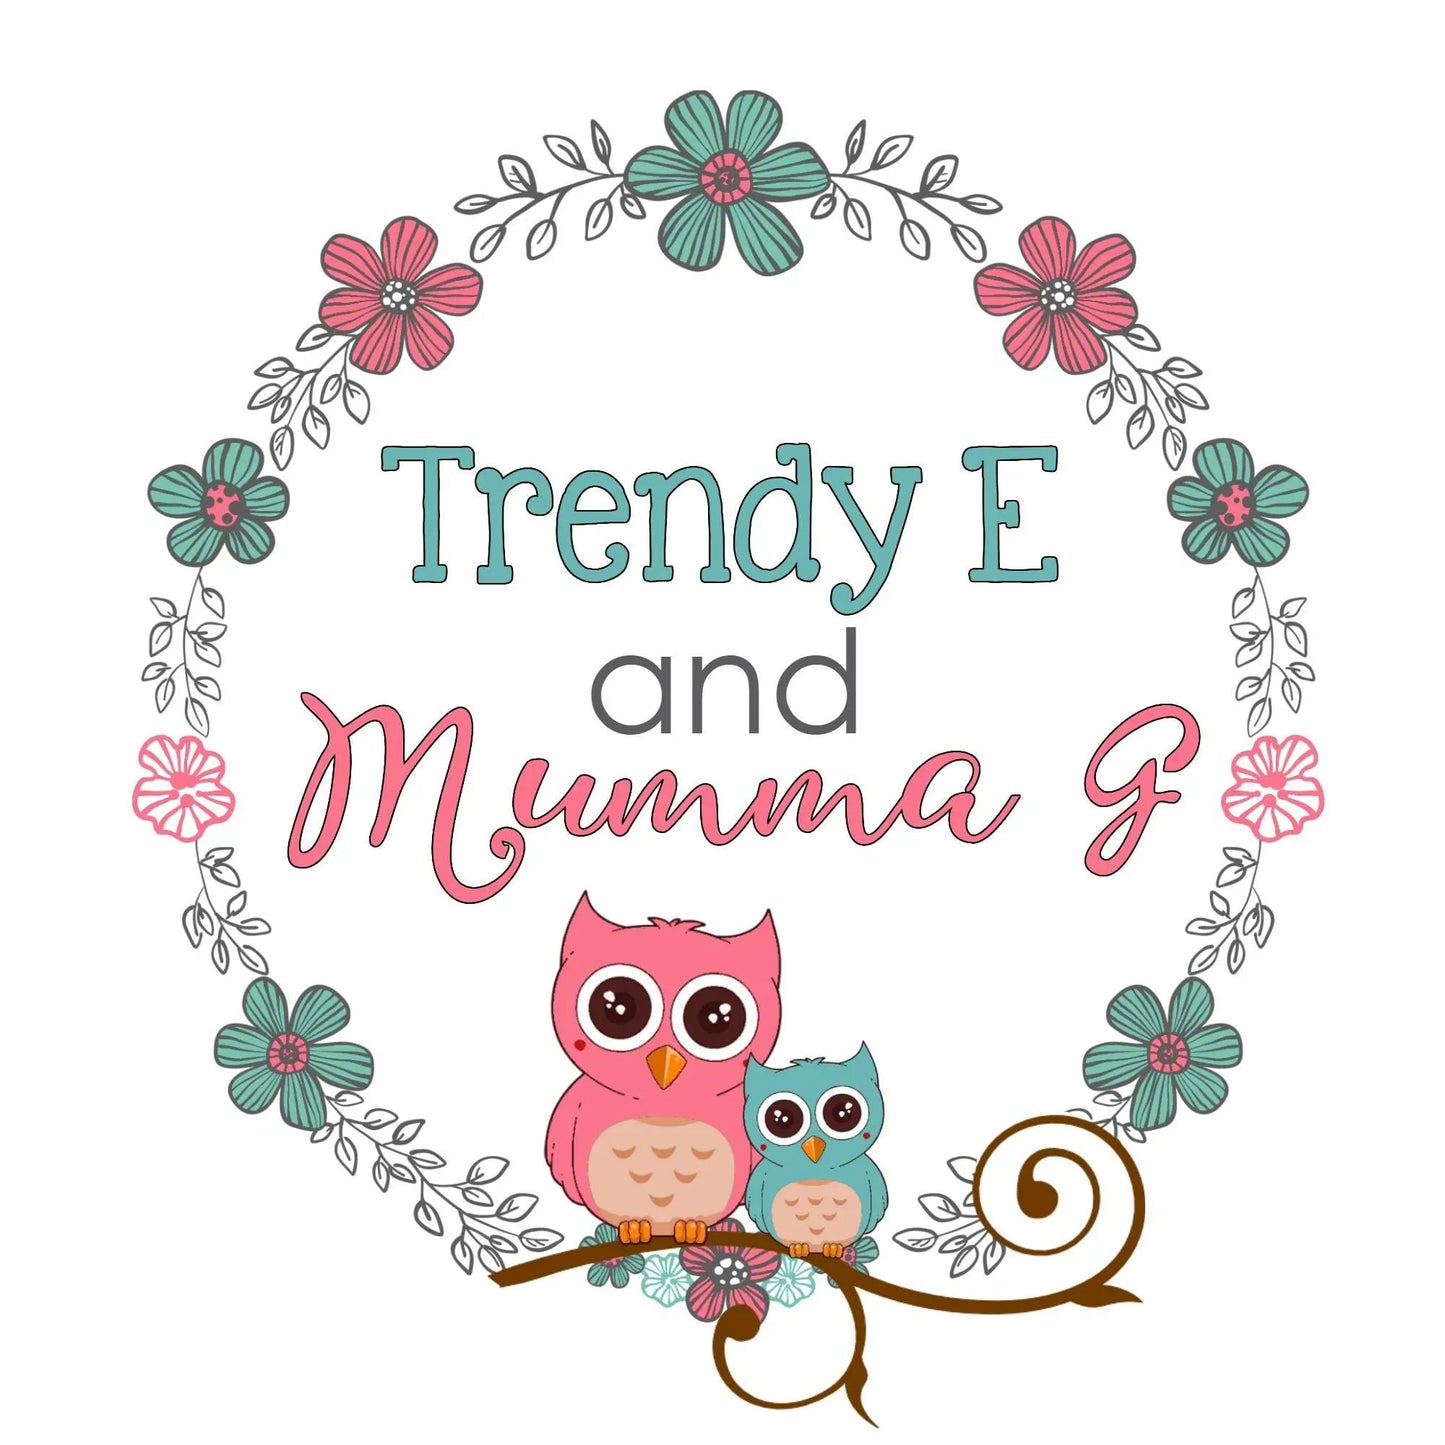 Exclusive Listing - Trendy E & Mumma G Designs only Paper Love Card